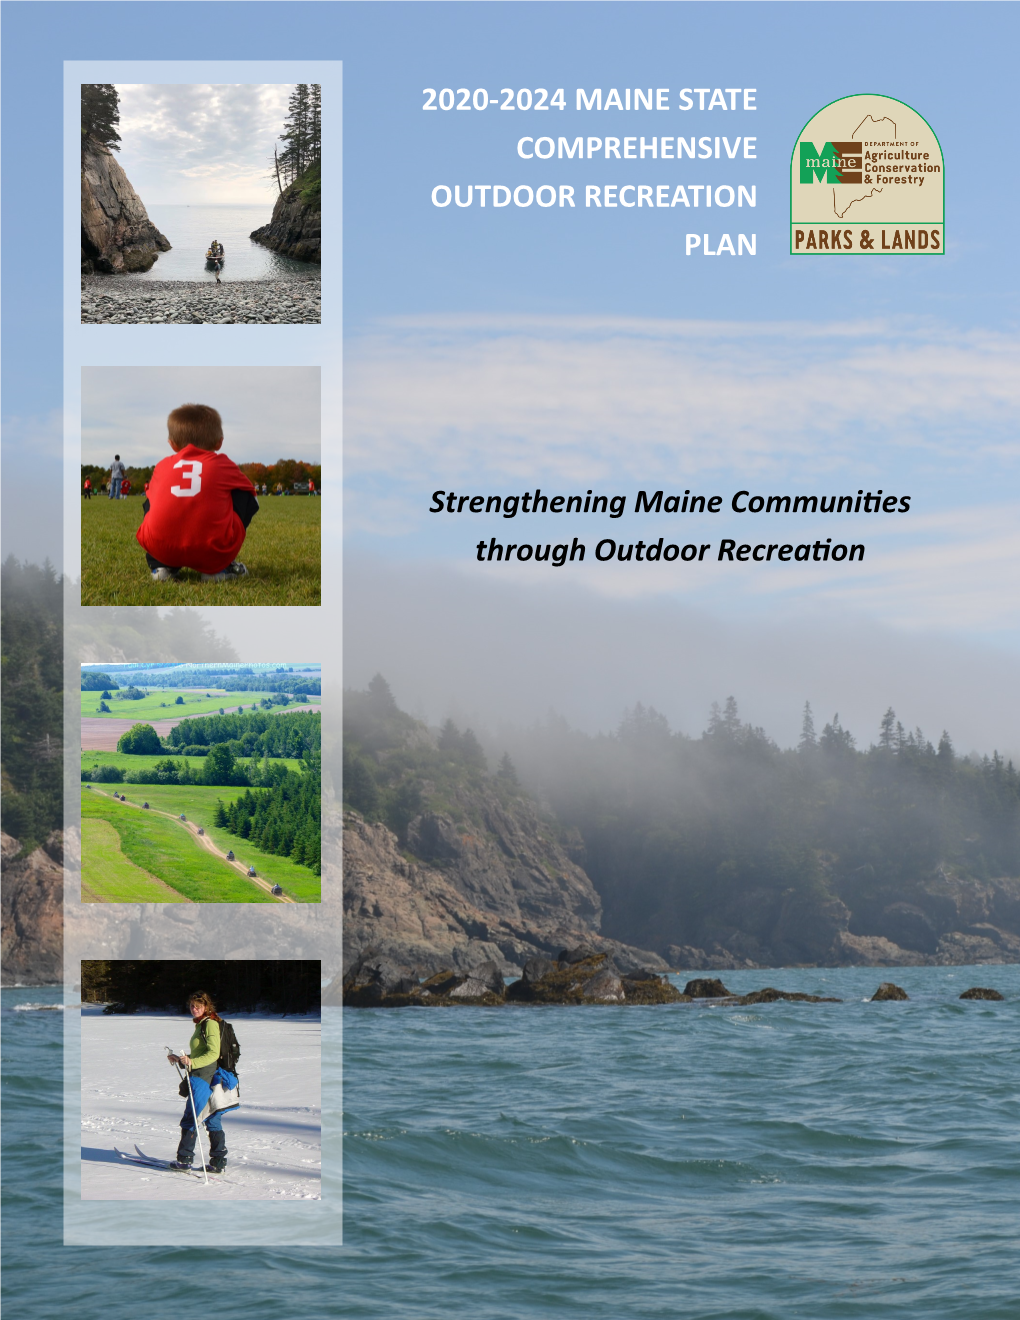 2020-2024 Maine State Comprehensive Outdoor Recreation Plan